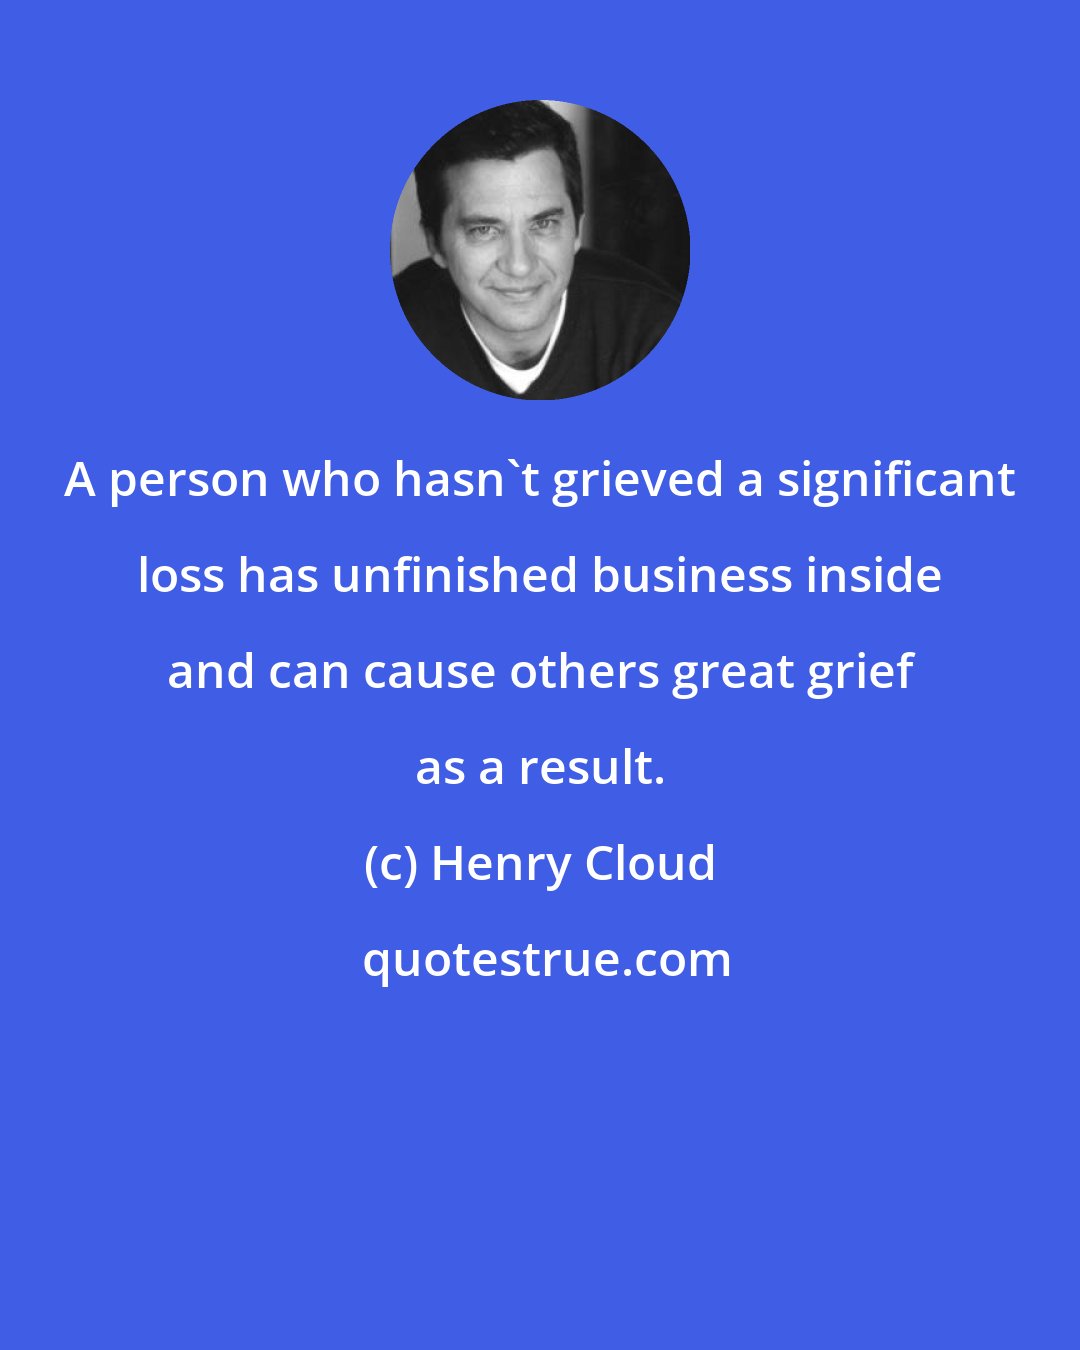 Henry Cloud: A person who hasn't grieved a significant loss has unfinished business inside and can cause others great grief as a result.